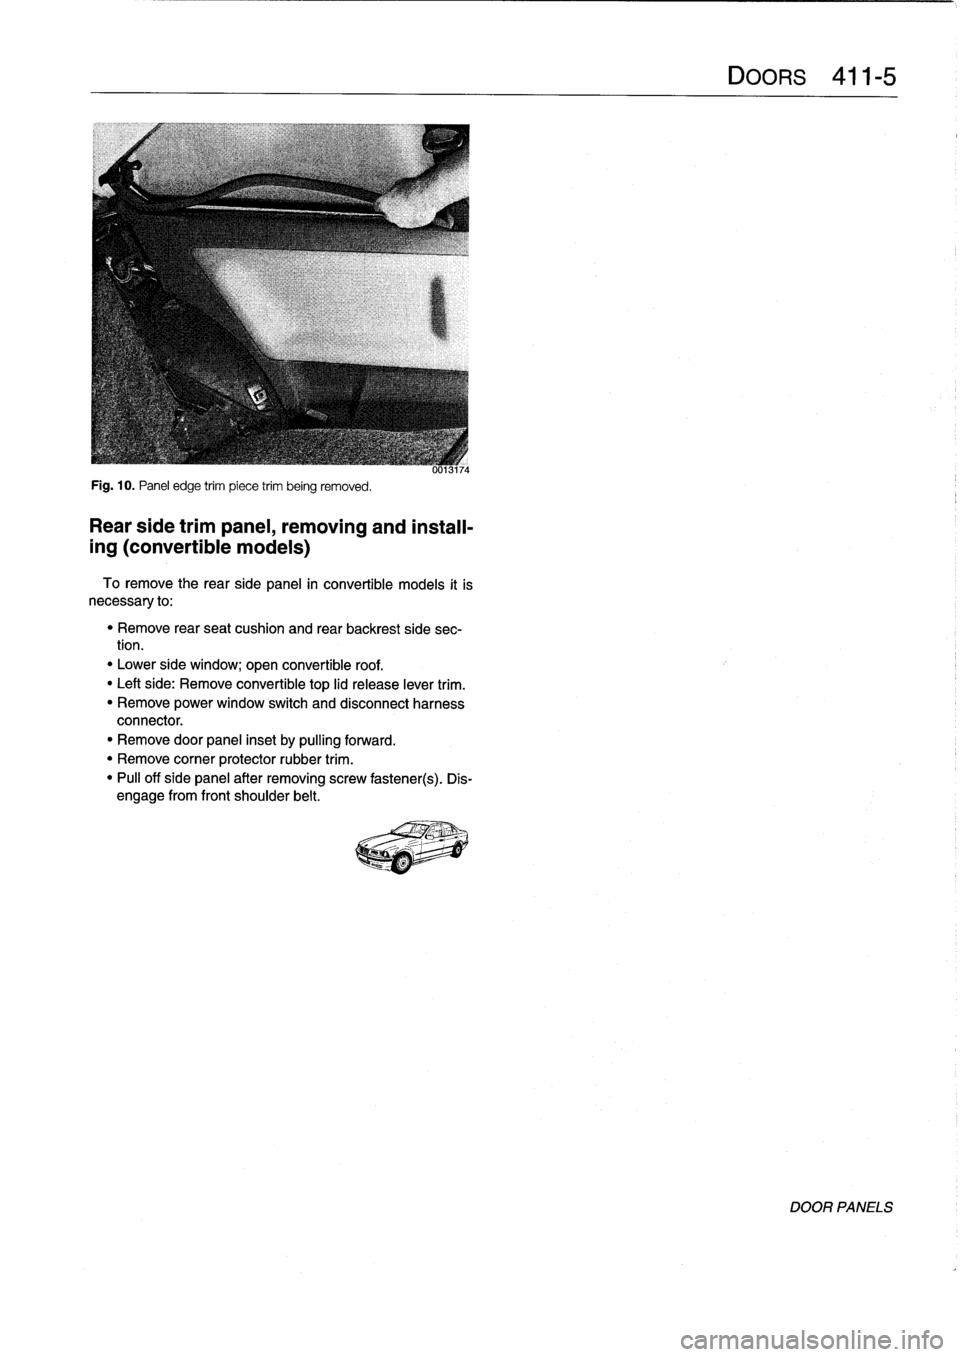 BMW M3 1993 E36 Owners Guide 
Fig
.
10
.
Panel
edge
trim
piece
trim
being
removed
.

Rear
side
trimpanel,
removing
and
install-

ing
(convertible
models)

To
remove
the
rearside
panel
in
convertible
models
it
is
necessary
to
:

"